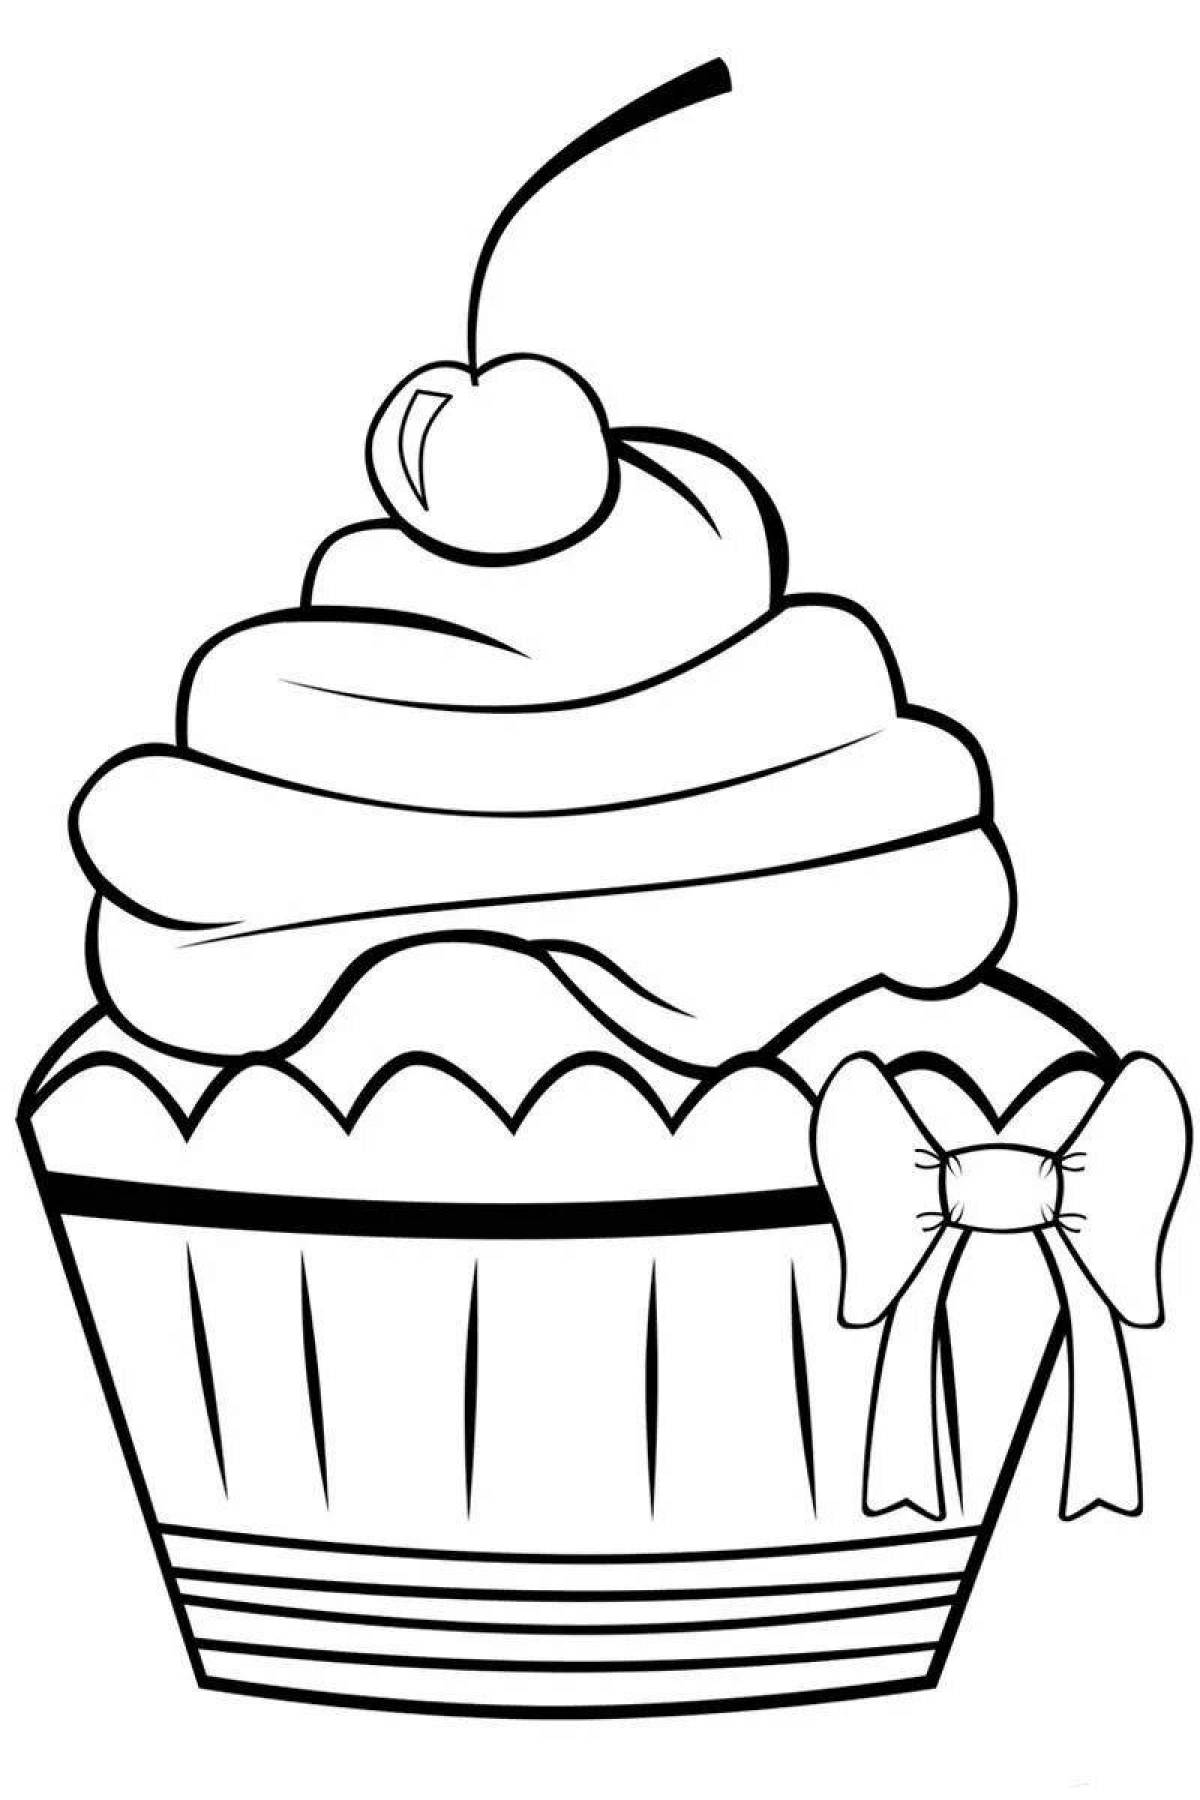 Coloring page nice sweets